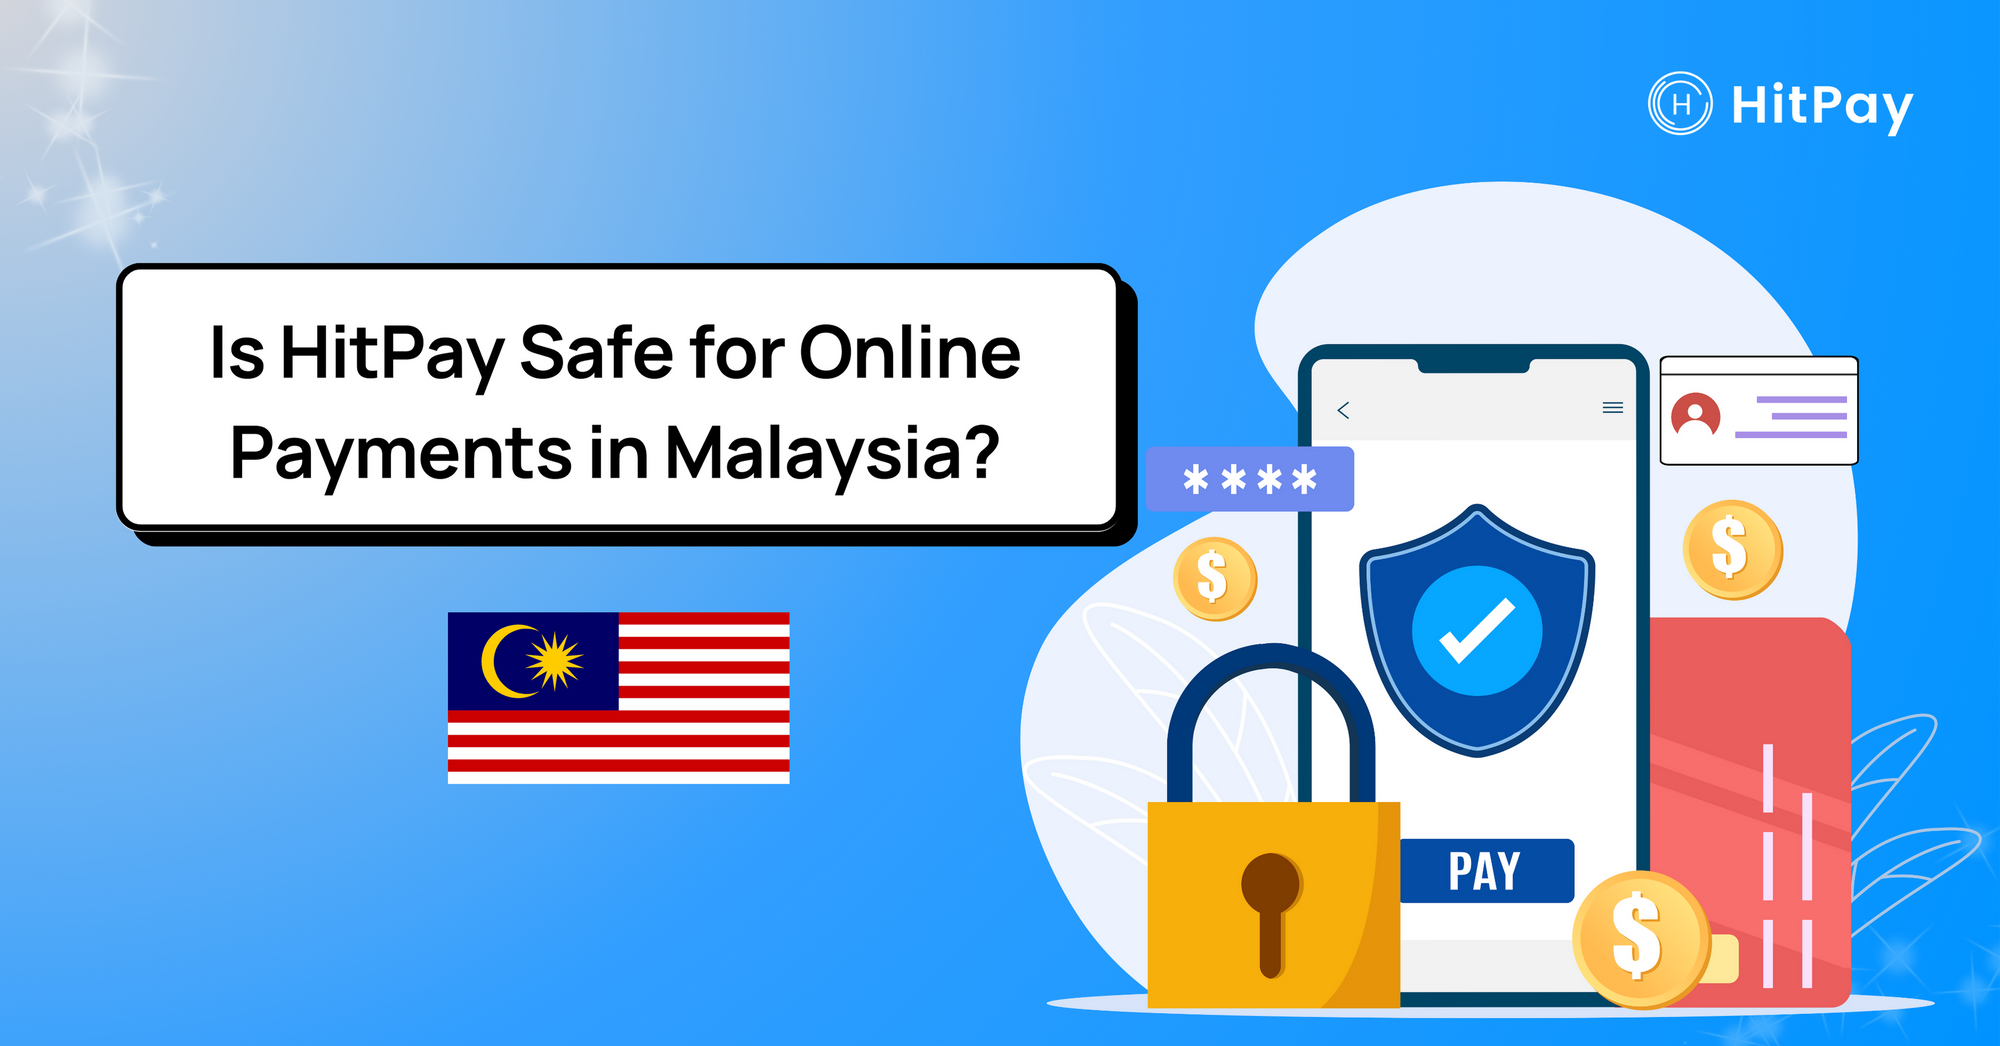 Is HitPay Safe for Online Payments in Malaysia?